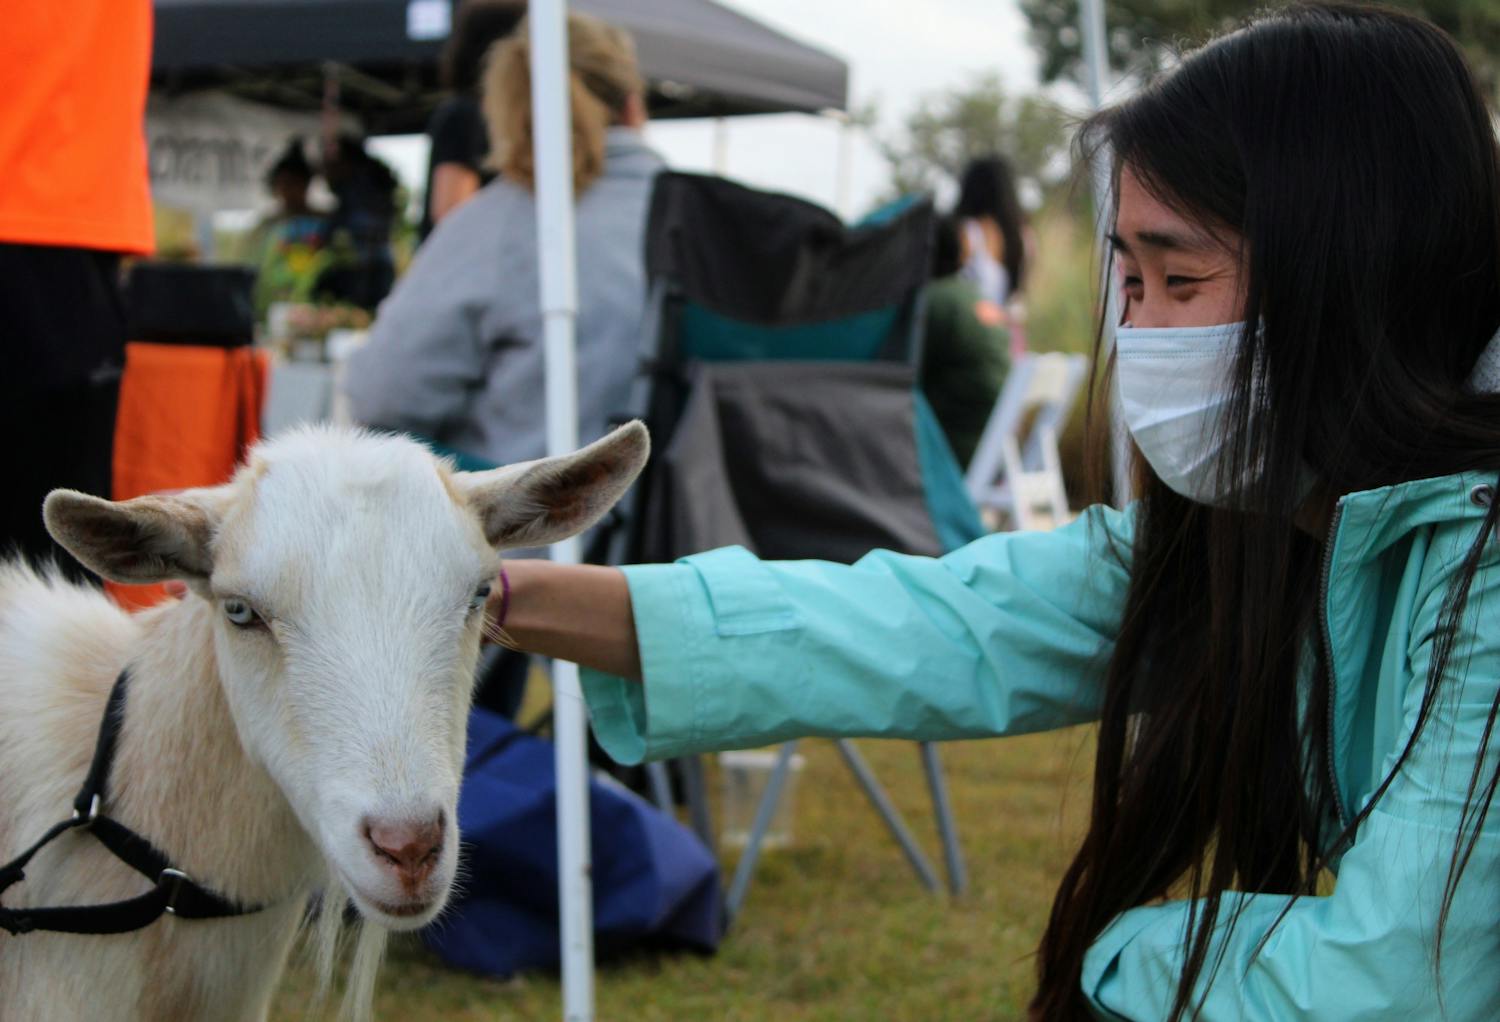 He Zheng pets a goat, one of the numerous farm animals at the Farm Bureau Food and Agriculture Festival on Saturday, Nov. 20, 2021. 